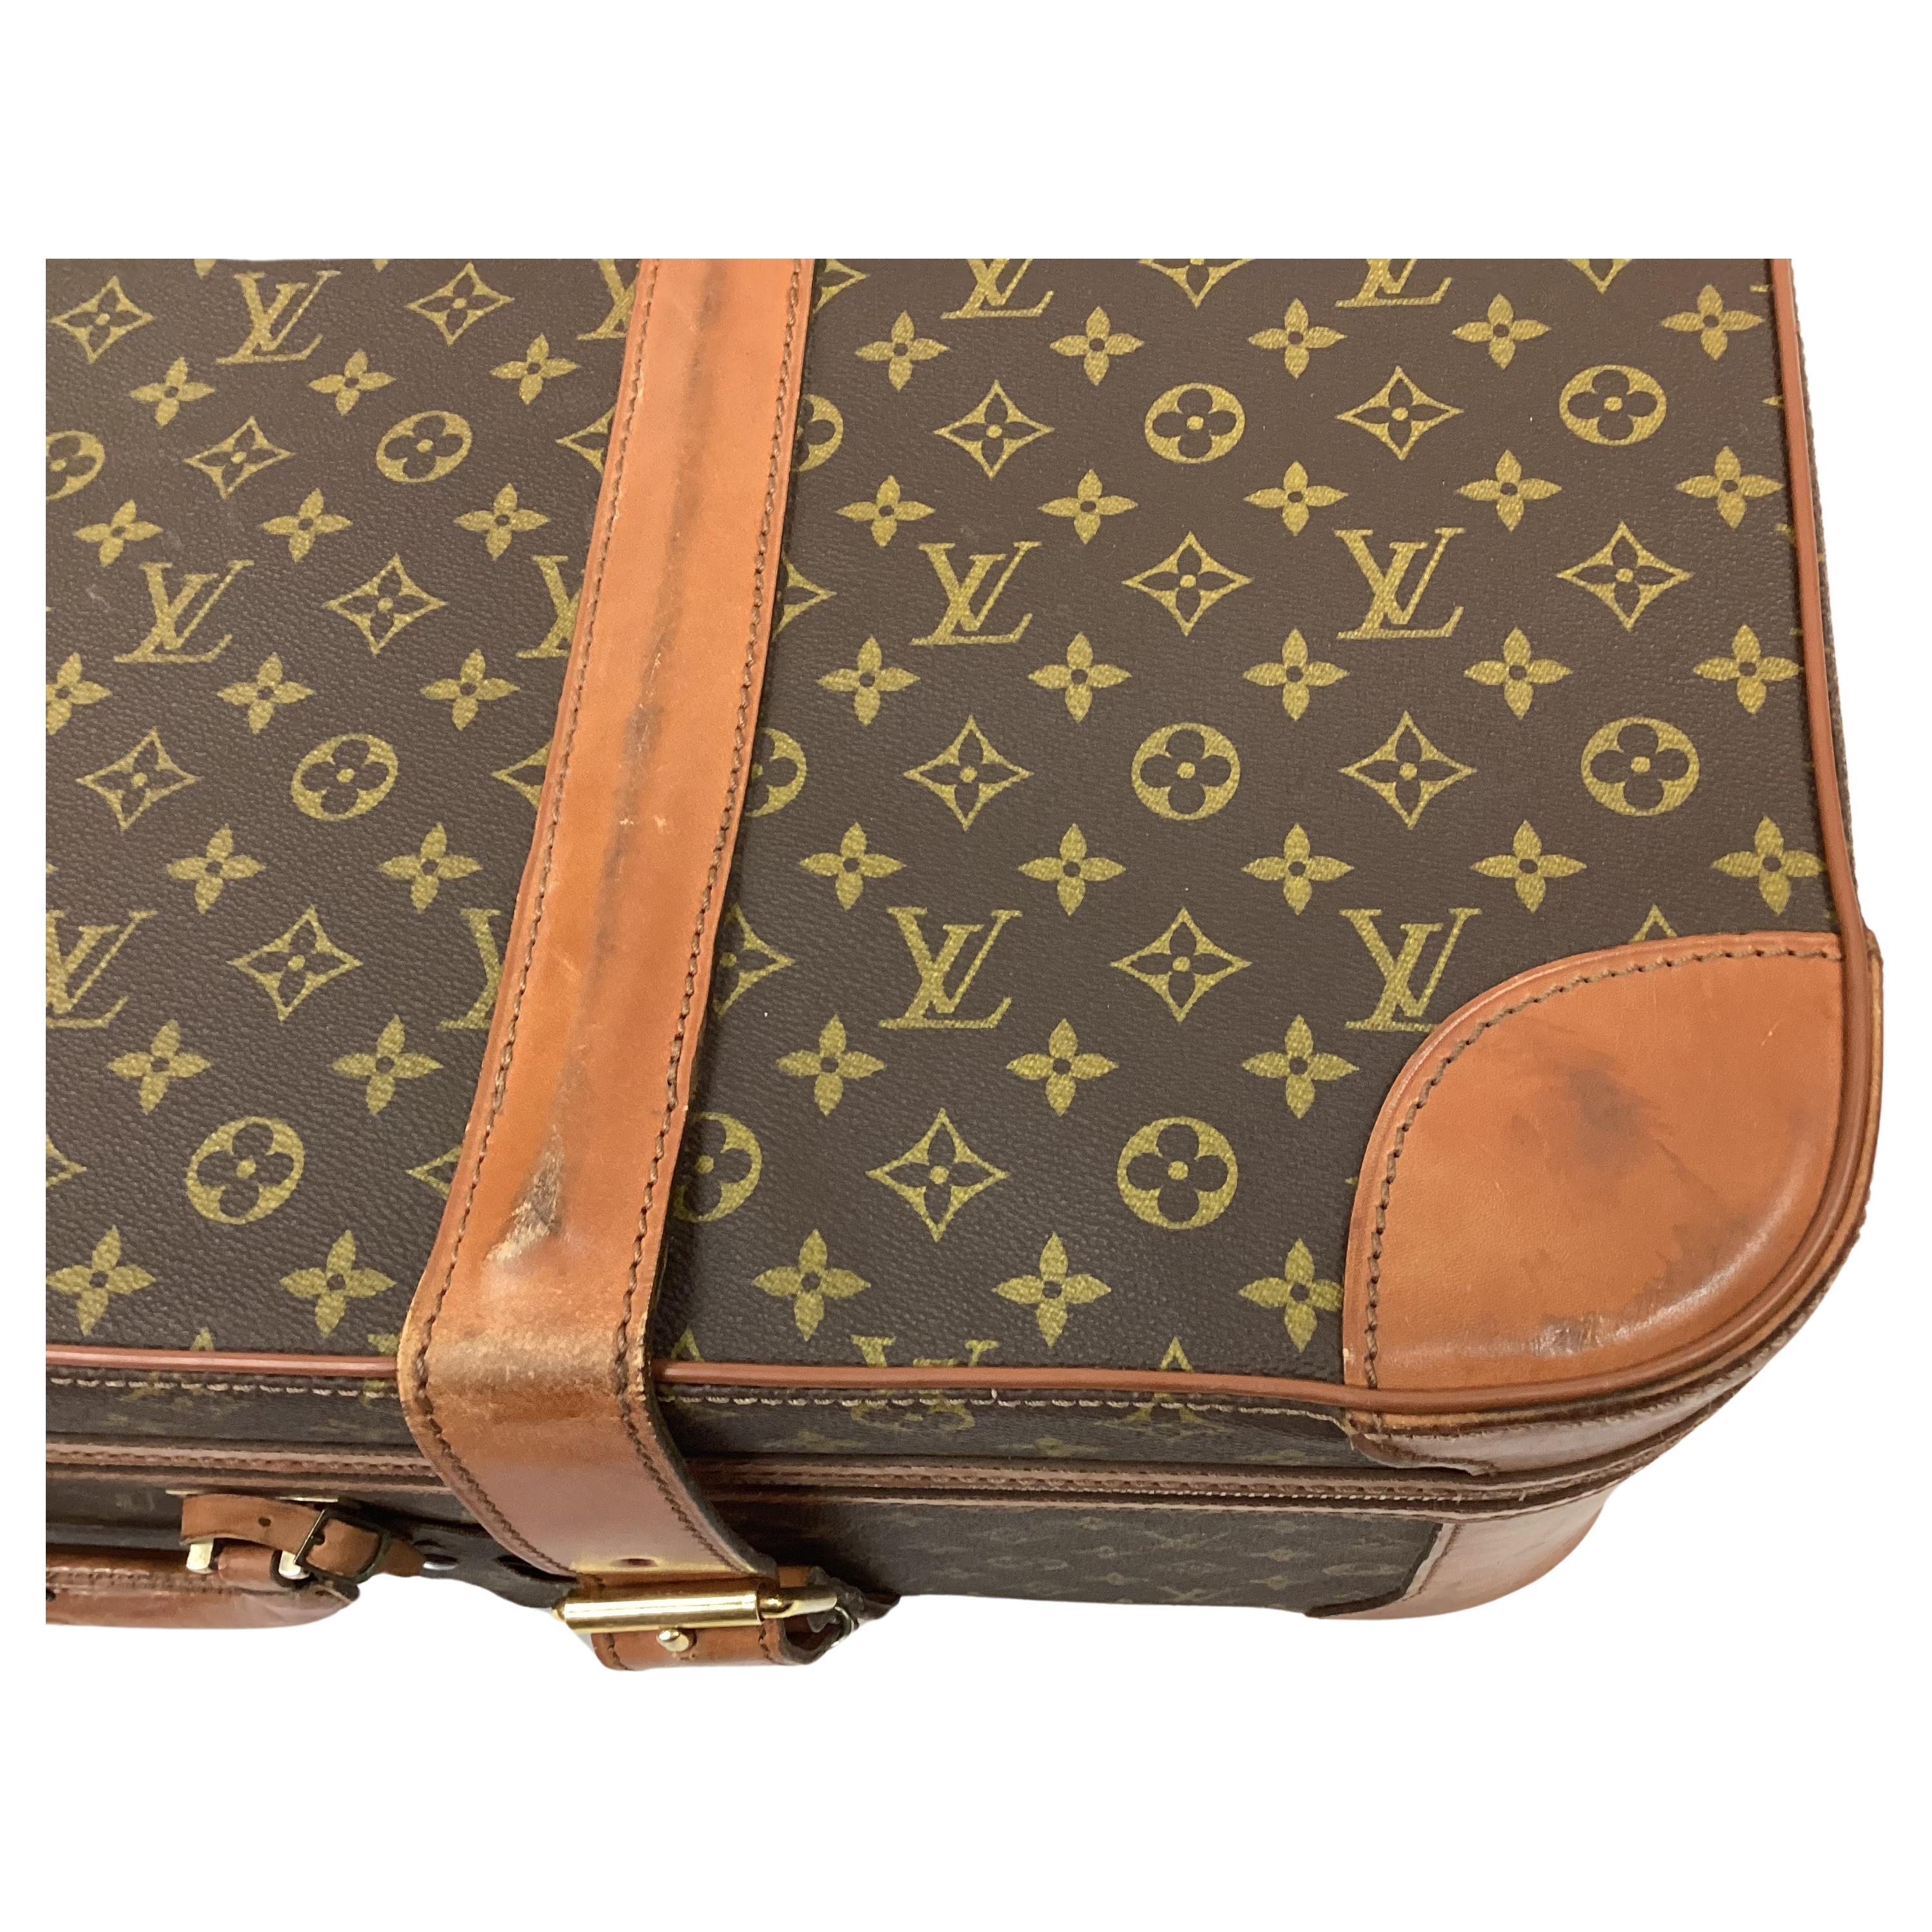 Large Vintage Louis Vuitton Double Strap Leather Suitcase In Good Condition For Sale In Bradenton, FL